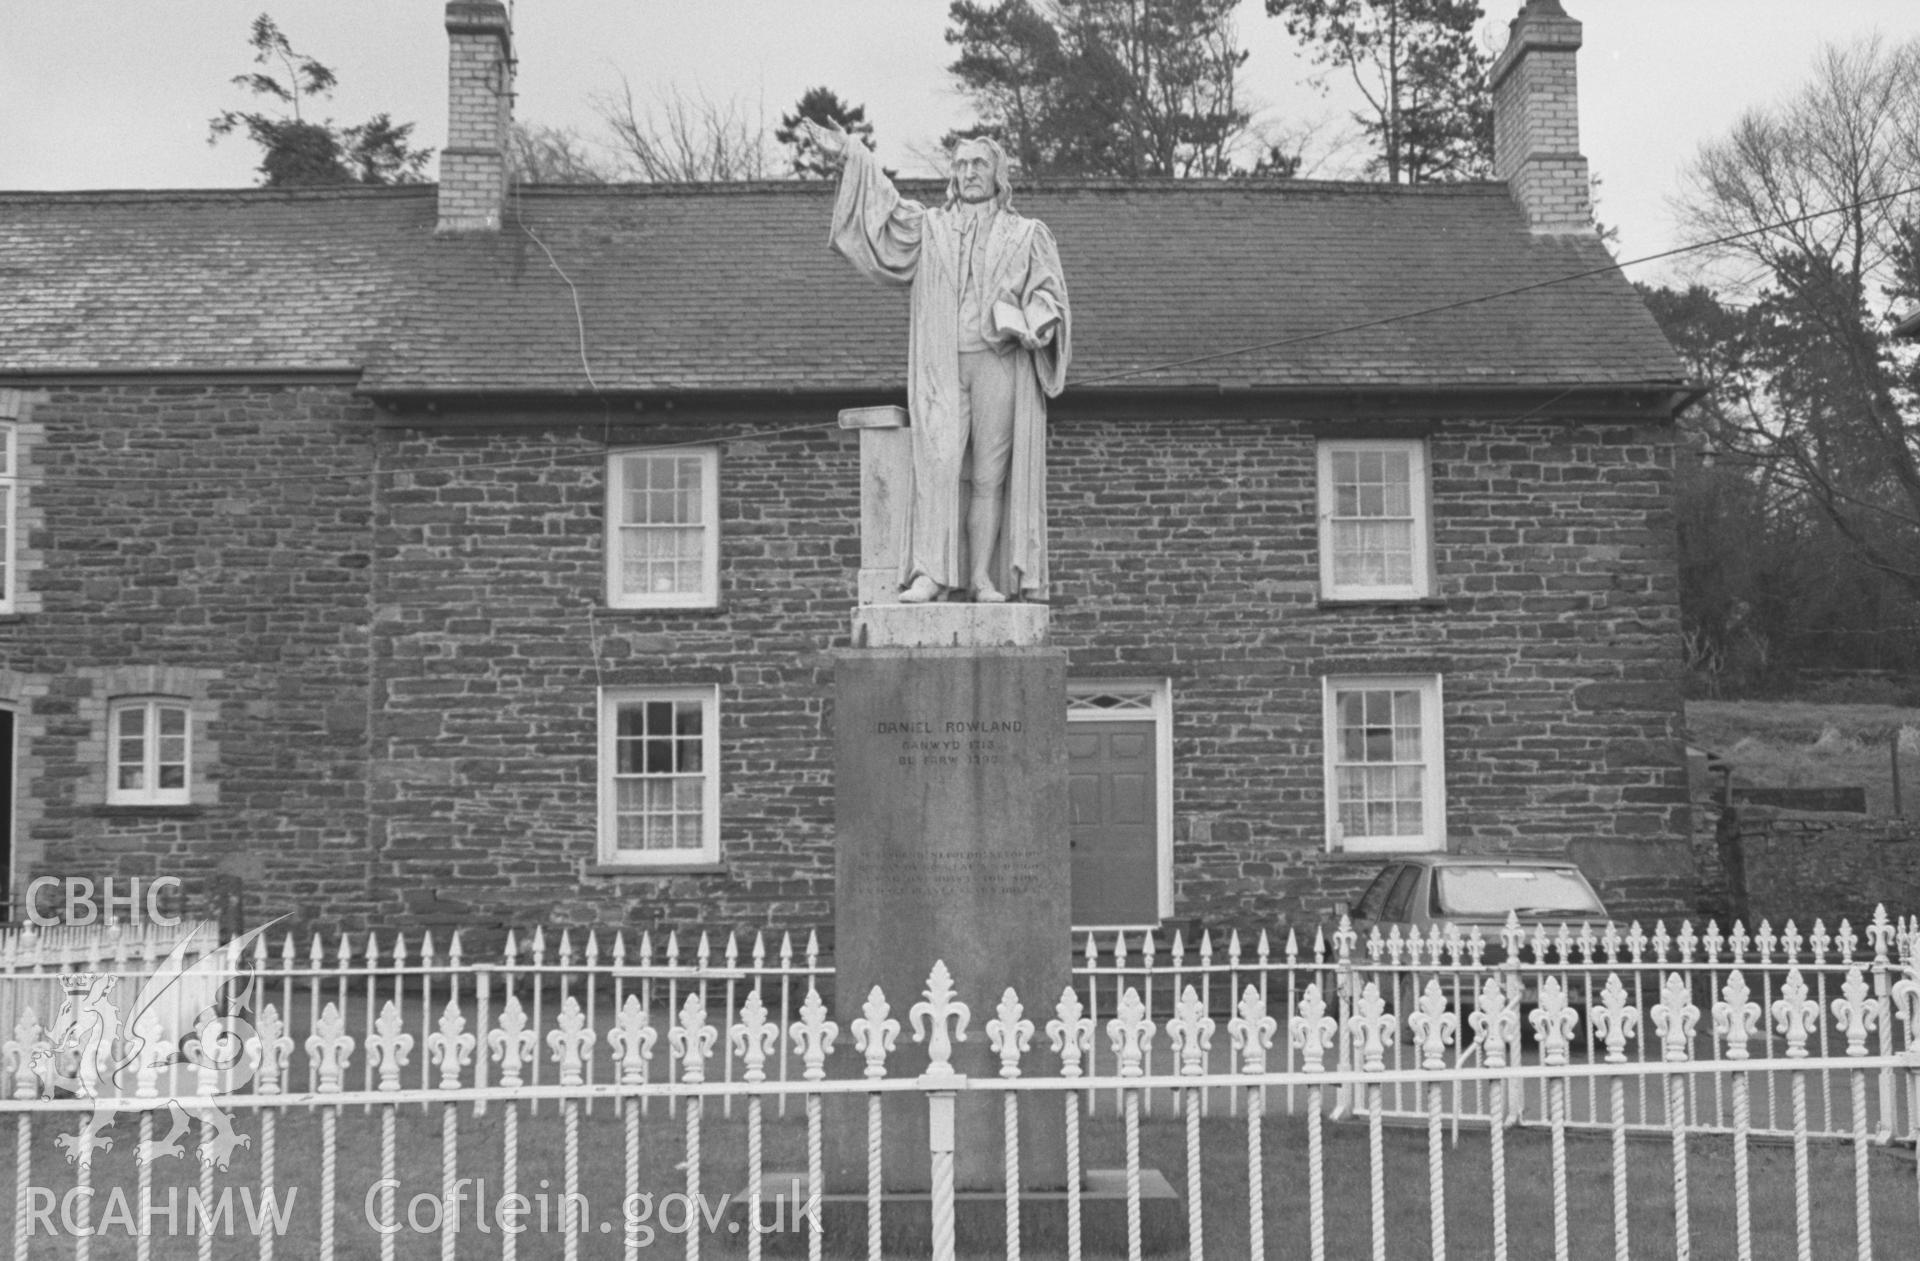 Exterior, chapel house with statue of Daniel Rowlands. NA/CD/97/008